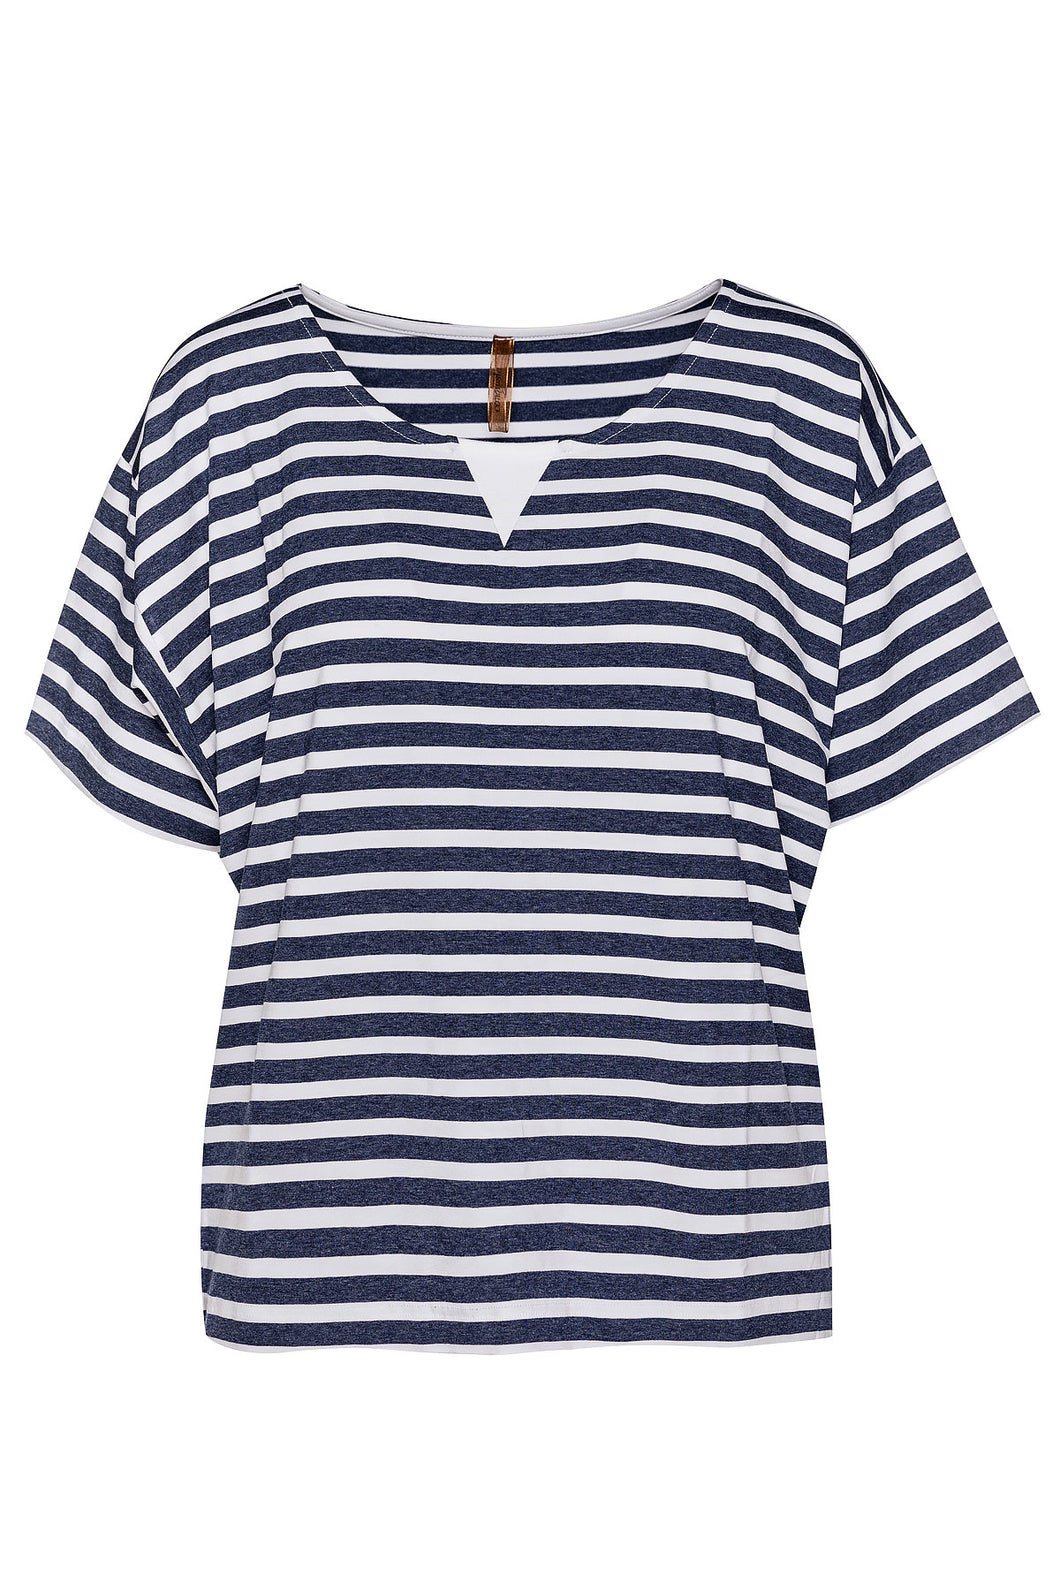 Blue and White Striped Top